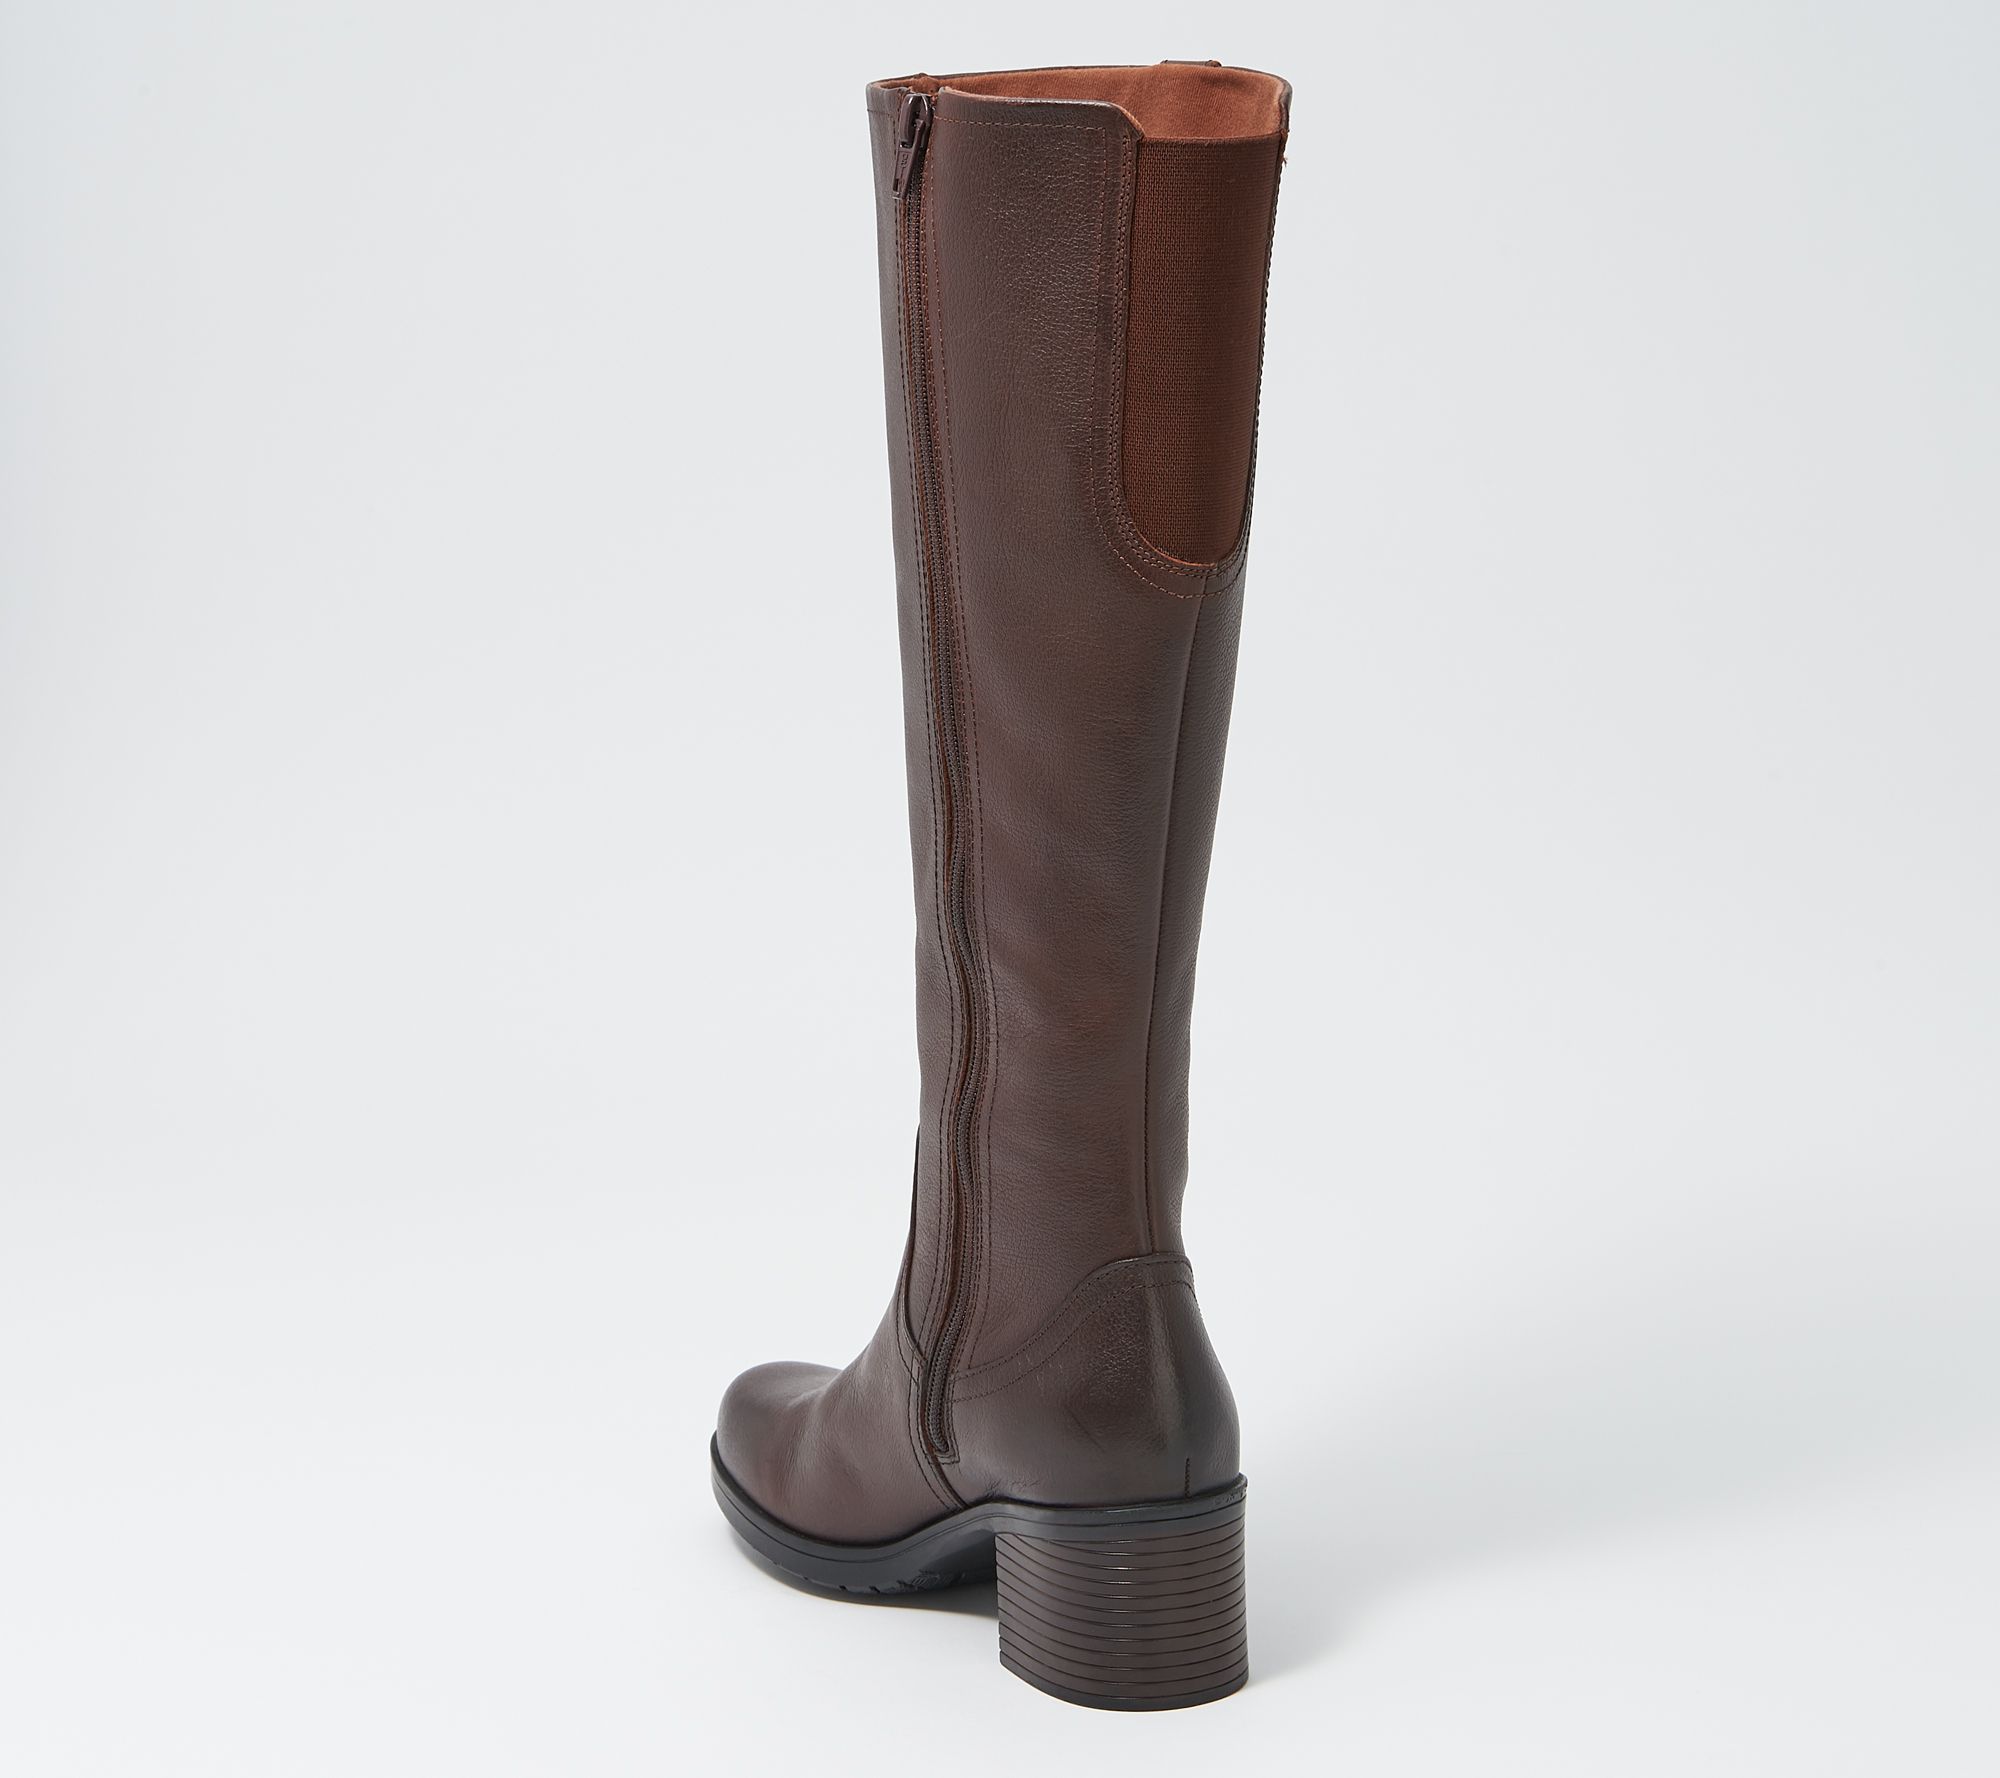 Clarks Collection Wide Calf Tall Leather Boots - Hollis Moon - QVC.com